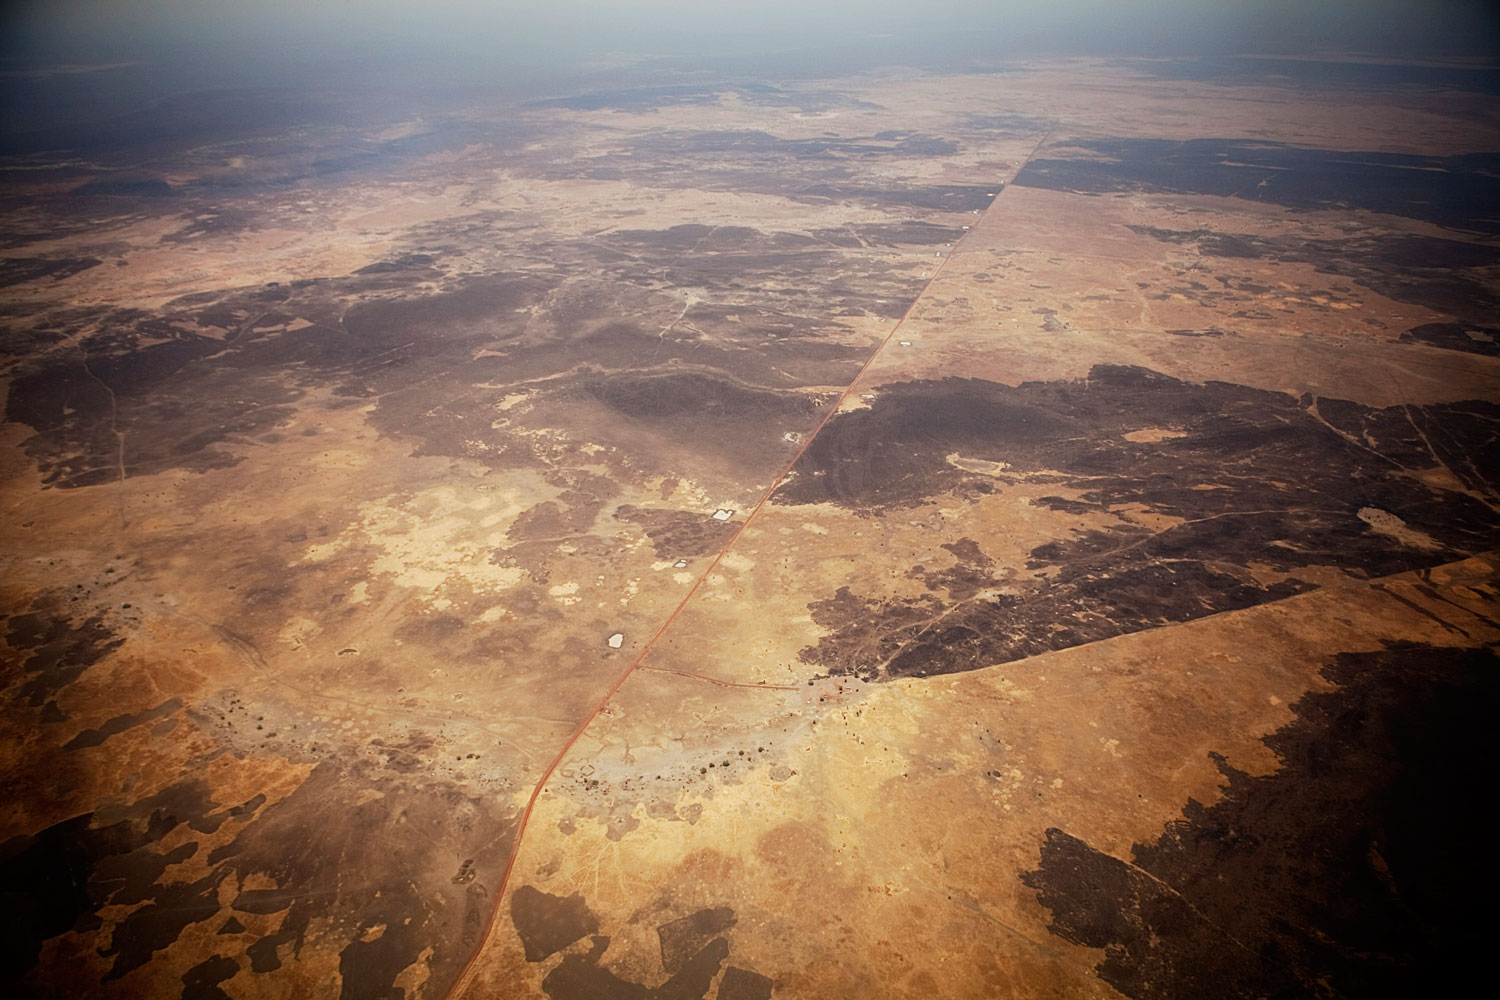 The arid plains surrounding the Yida camp South Sudan's Unity State.